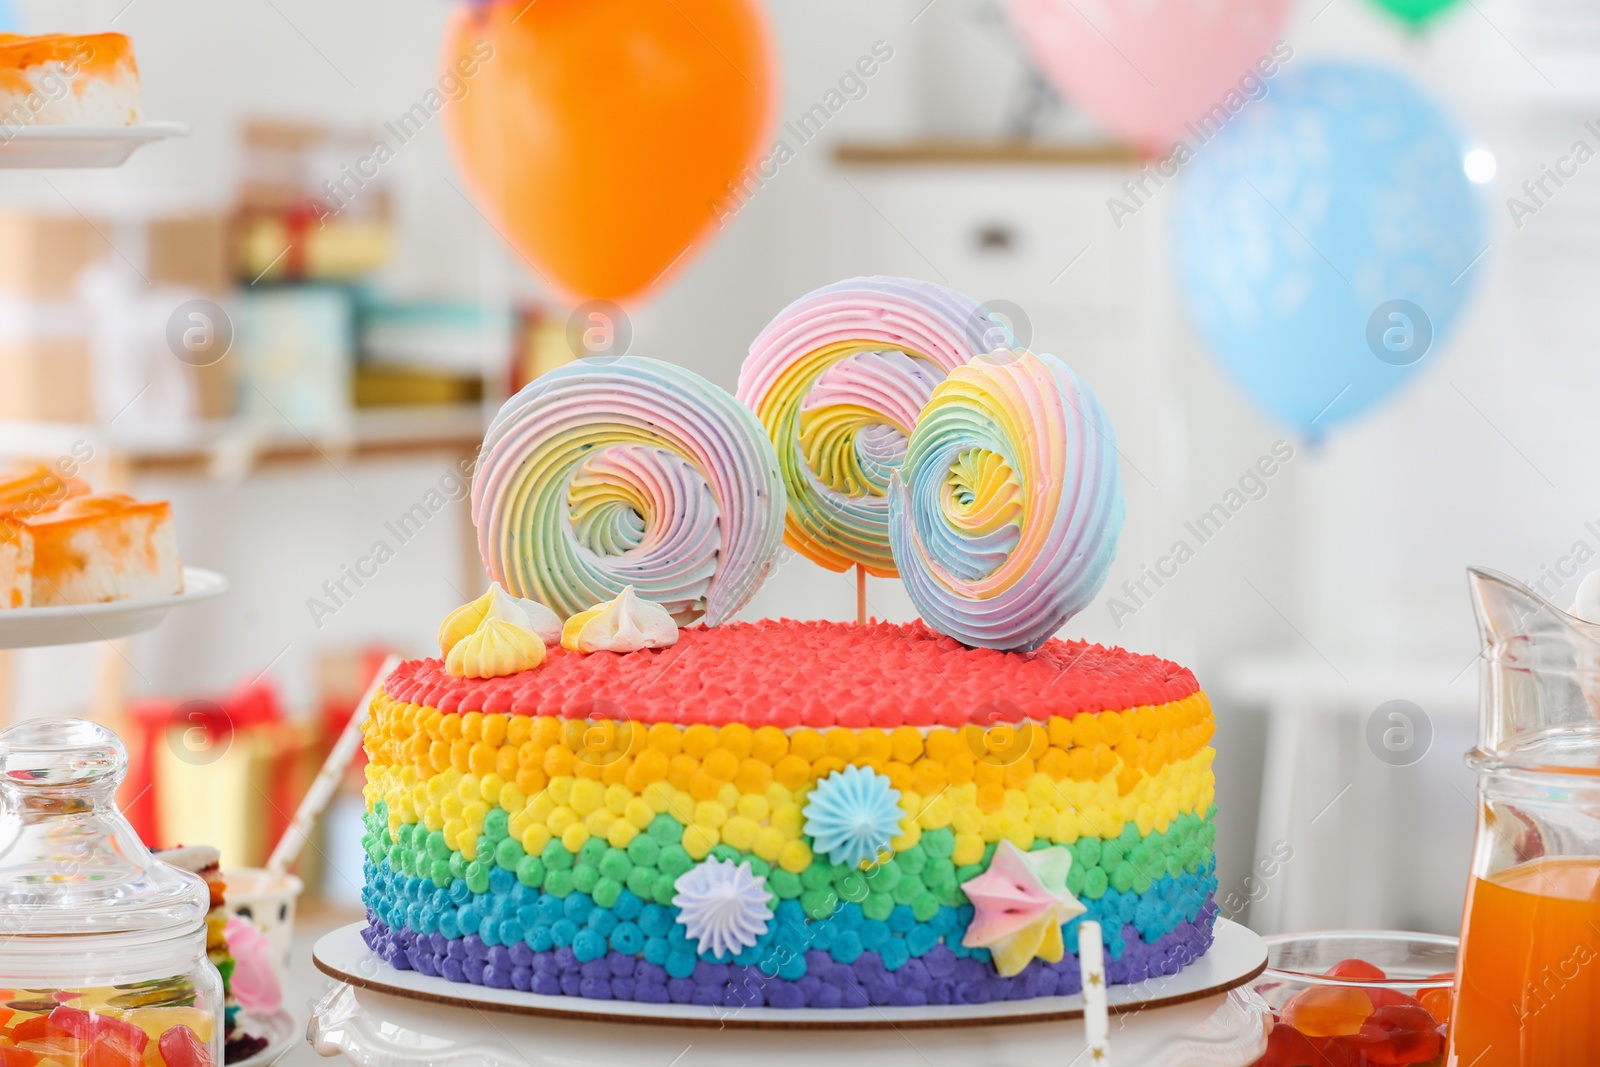 Photo of Bright birthday cake and other treats on table in decorated room